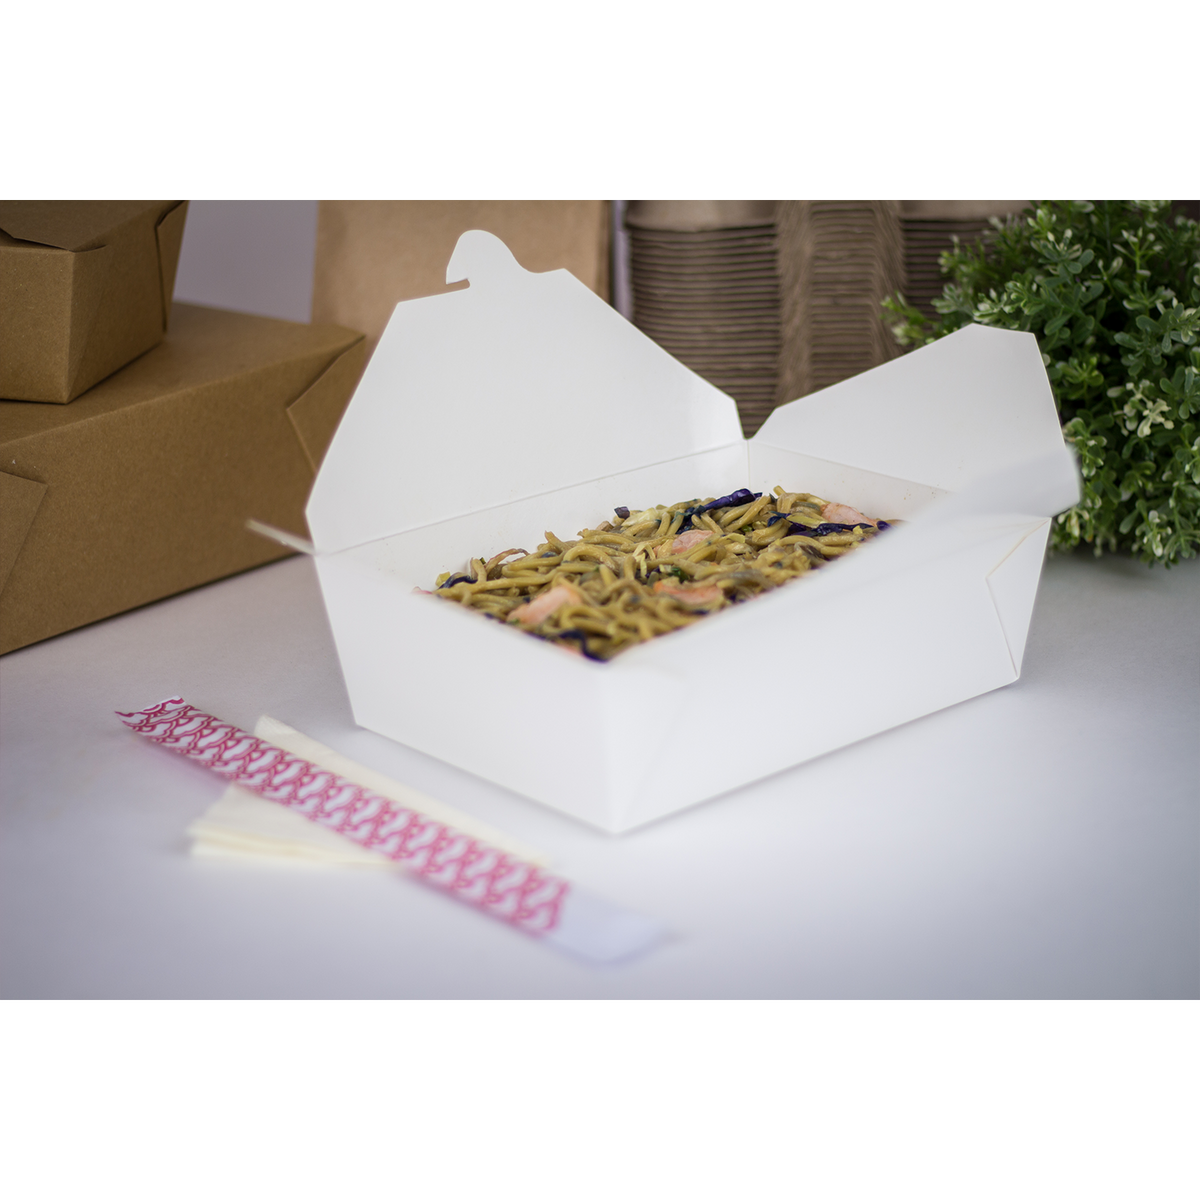 https://www.restaurantsupplydrops.shop/wp-content/uploads/1689/34/get-white-microwavable-folded-paper-3-take-out-container-karat-large-fold-to-go-box-76oz-7-8-x-5-5-x-2-4-200-count-karat-for-less-and-get-the-look-you-would-like_5.png